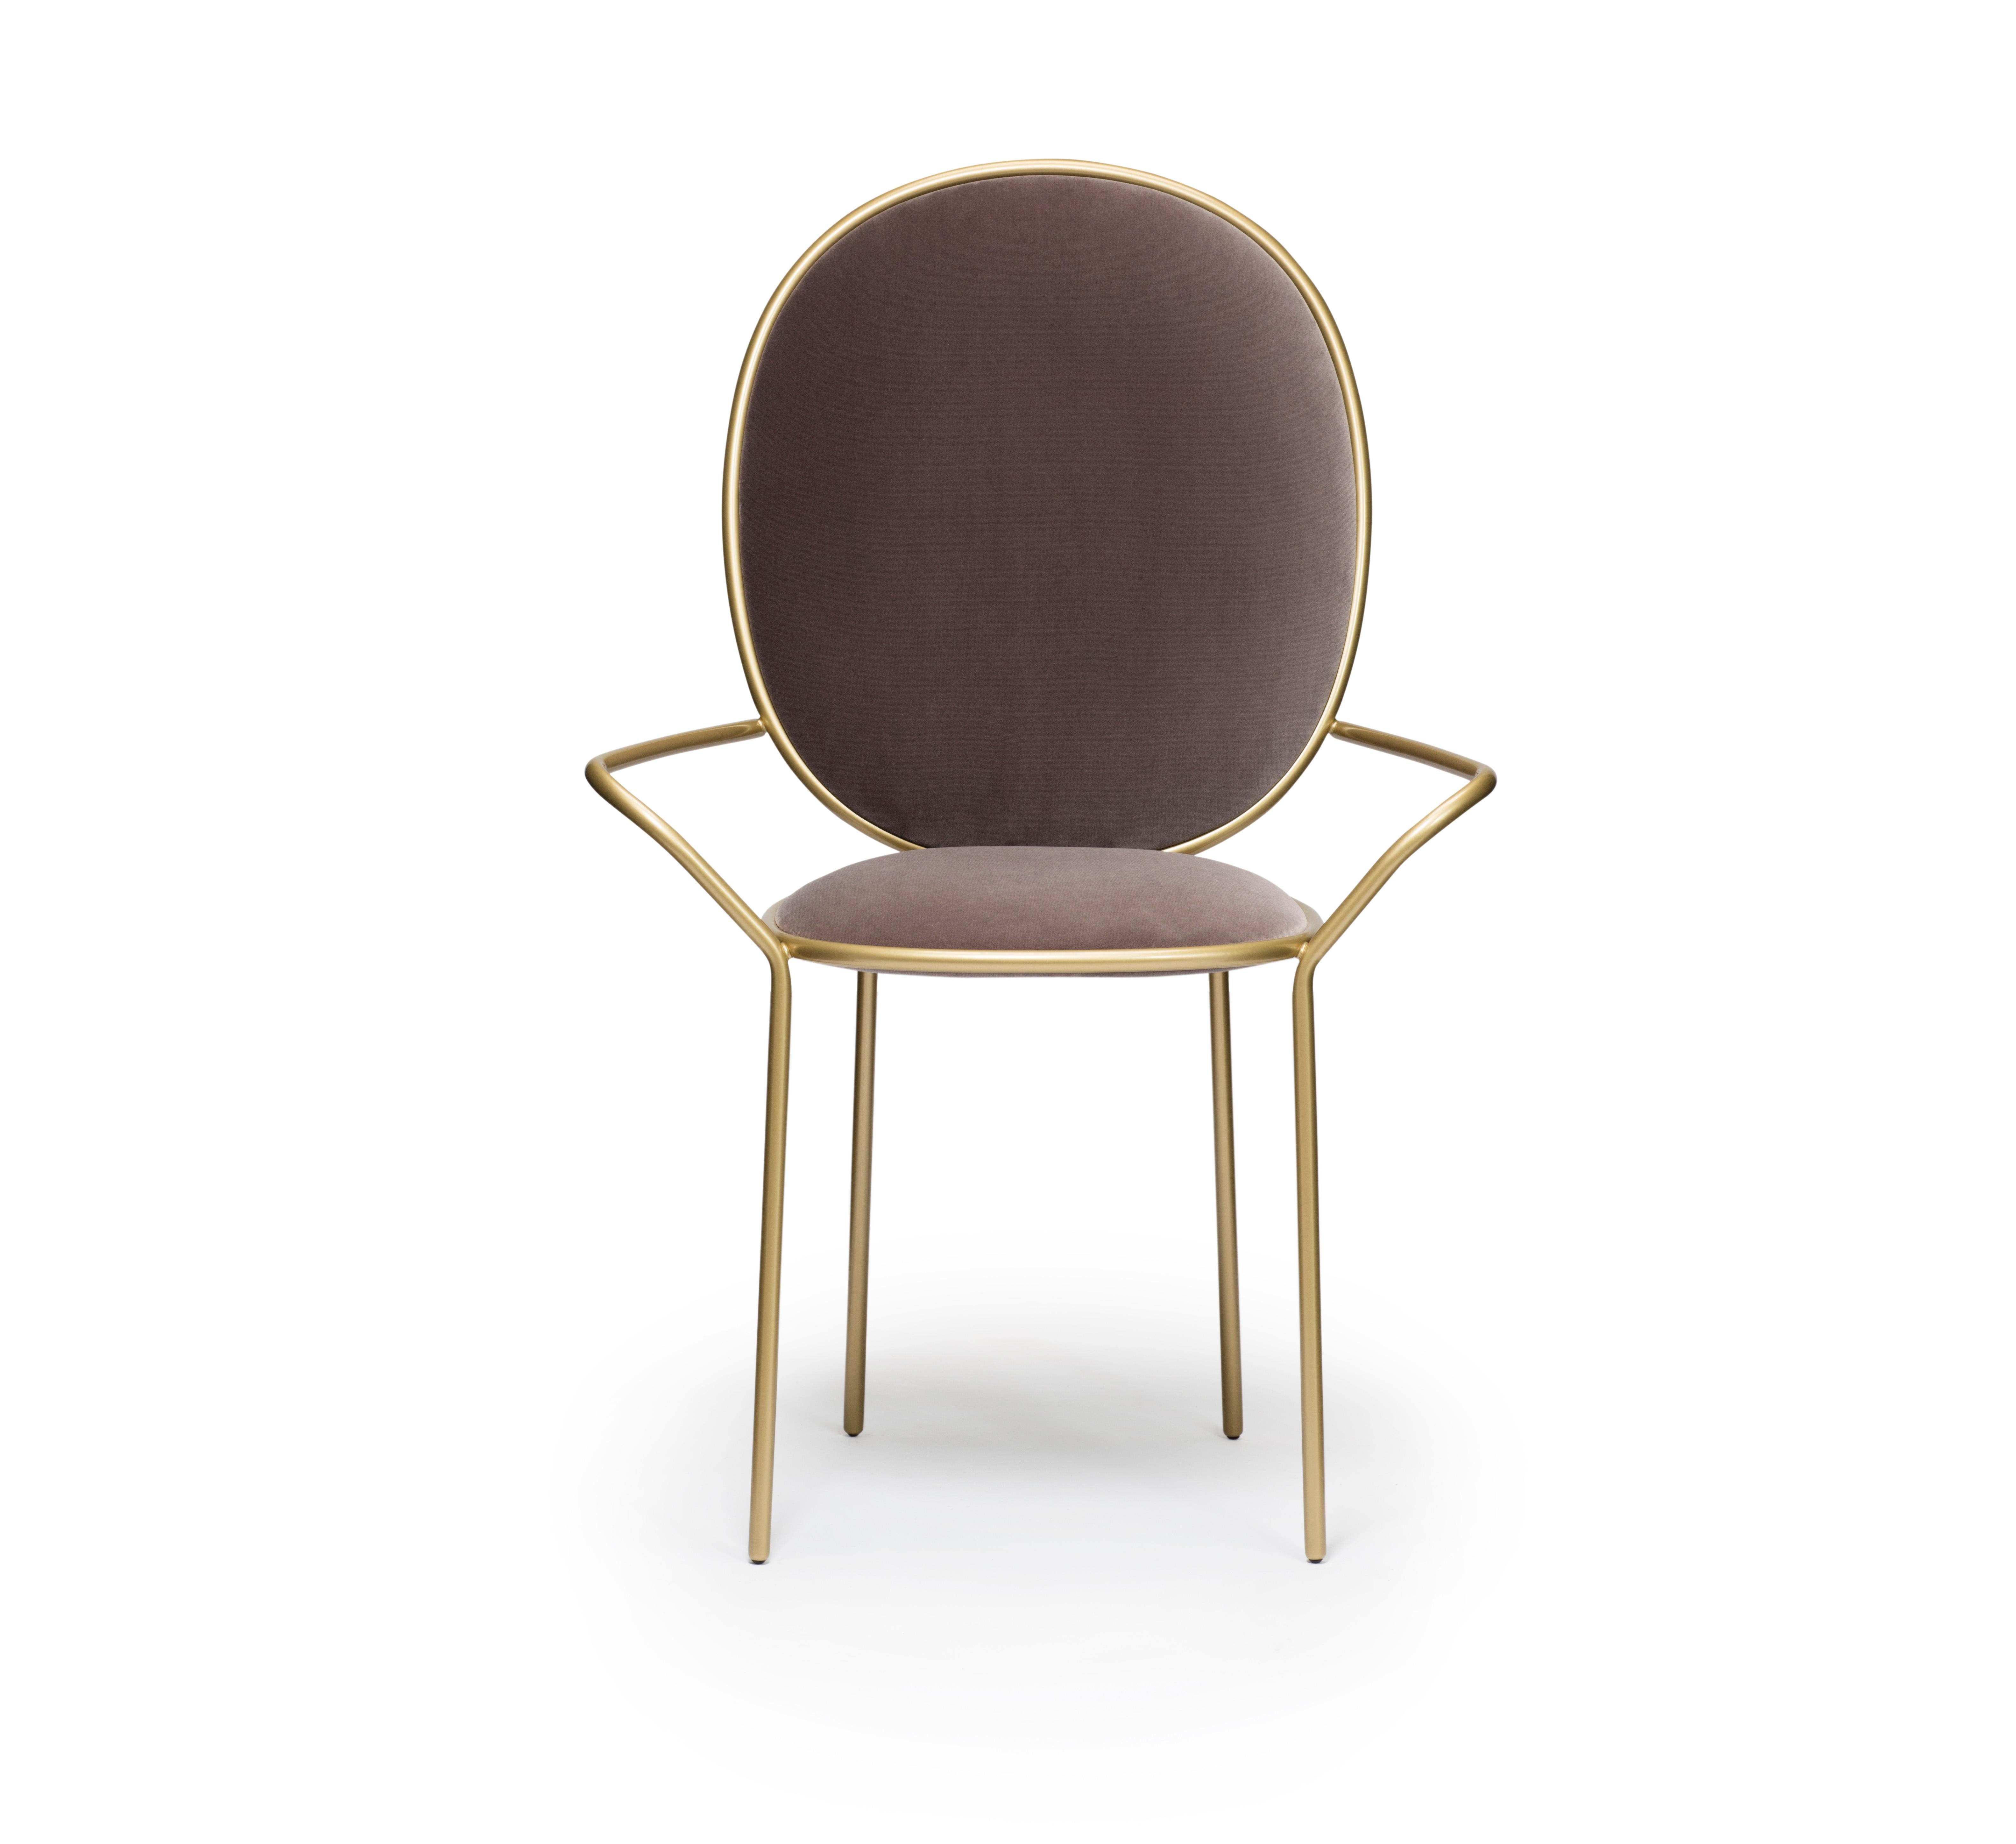 Contemporary taupe velvet upholstered dining armchair - Stay by Nika Zupanc

The Stay Family turns everyday seating into a special occasion. The Dining Chair and Dining Armchair are variations on an elegant social theme whilst the Dining Table